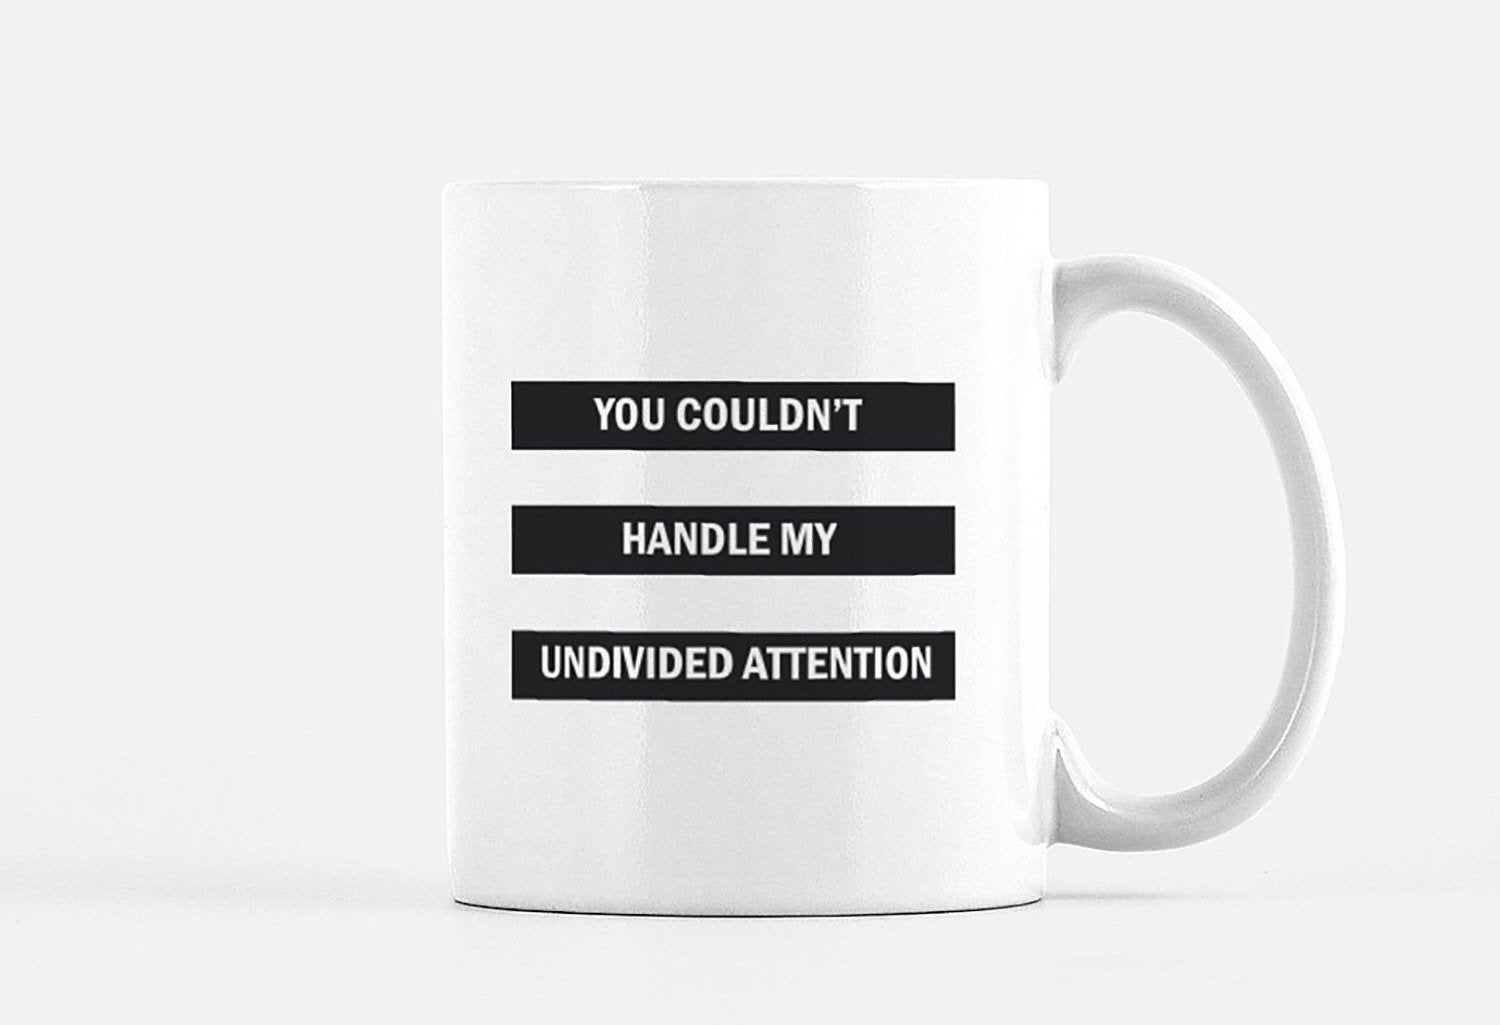 You couldn't handle my undivided attention. Dwight Schrute quote mug